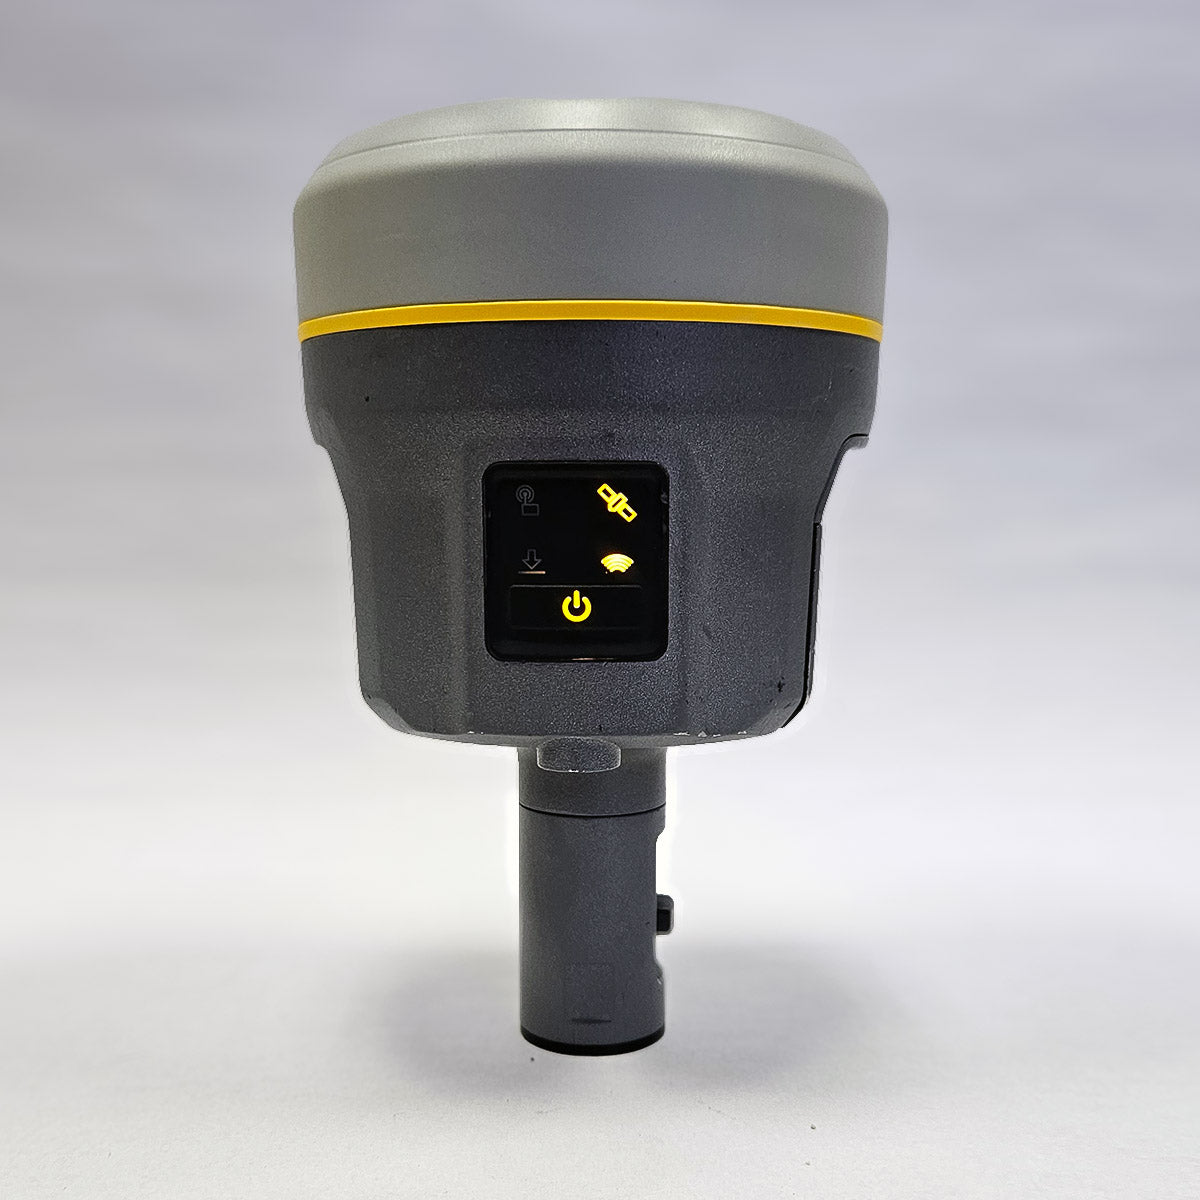 USED Trimble R10LT GNSS Receiver